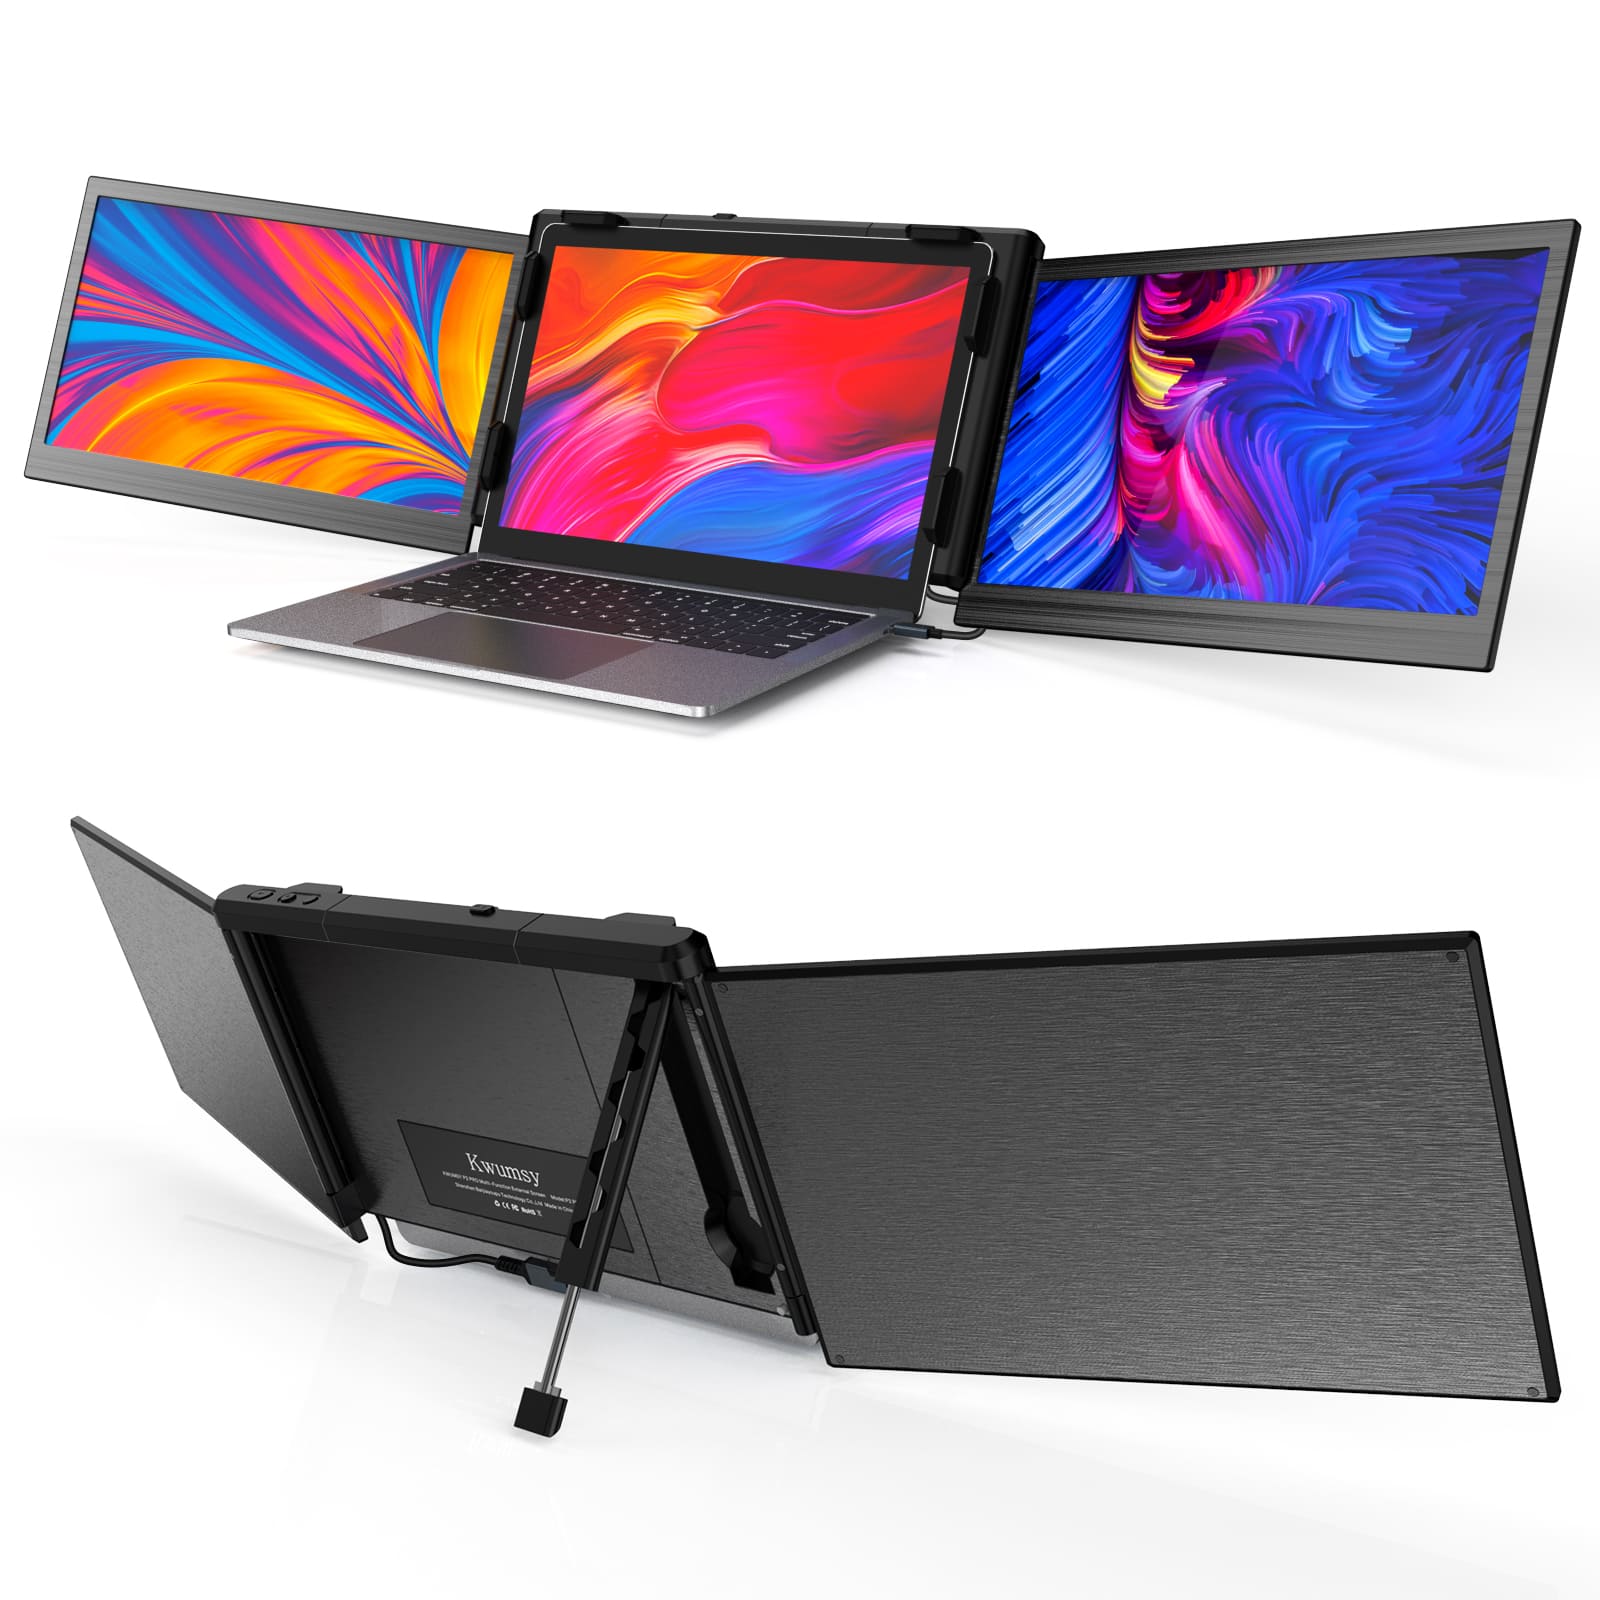 Kwumsy P2 PRO 13.3'' Laptop Tri-Screen